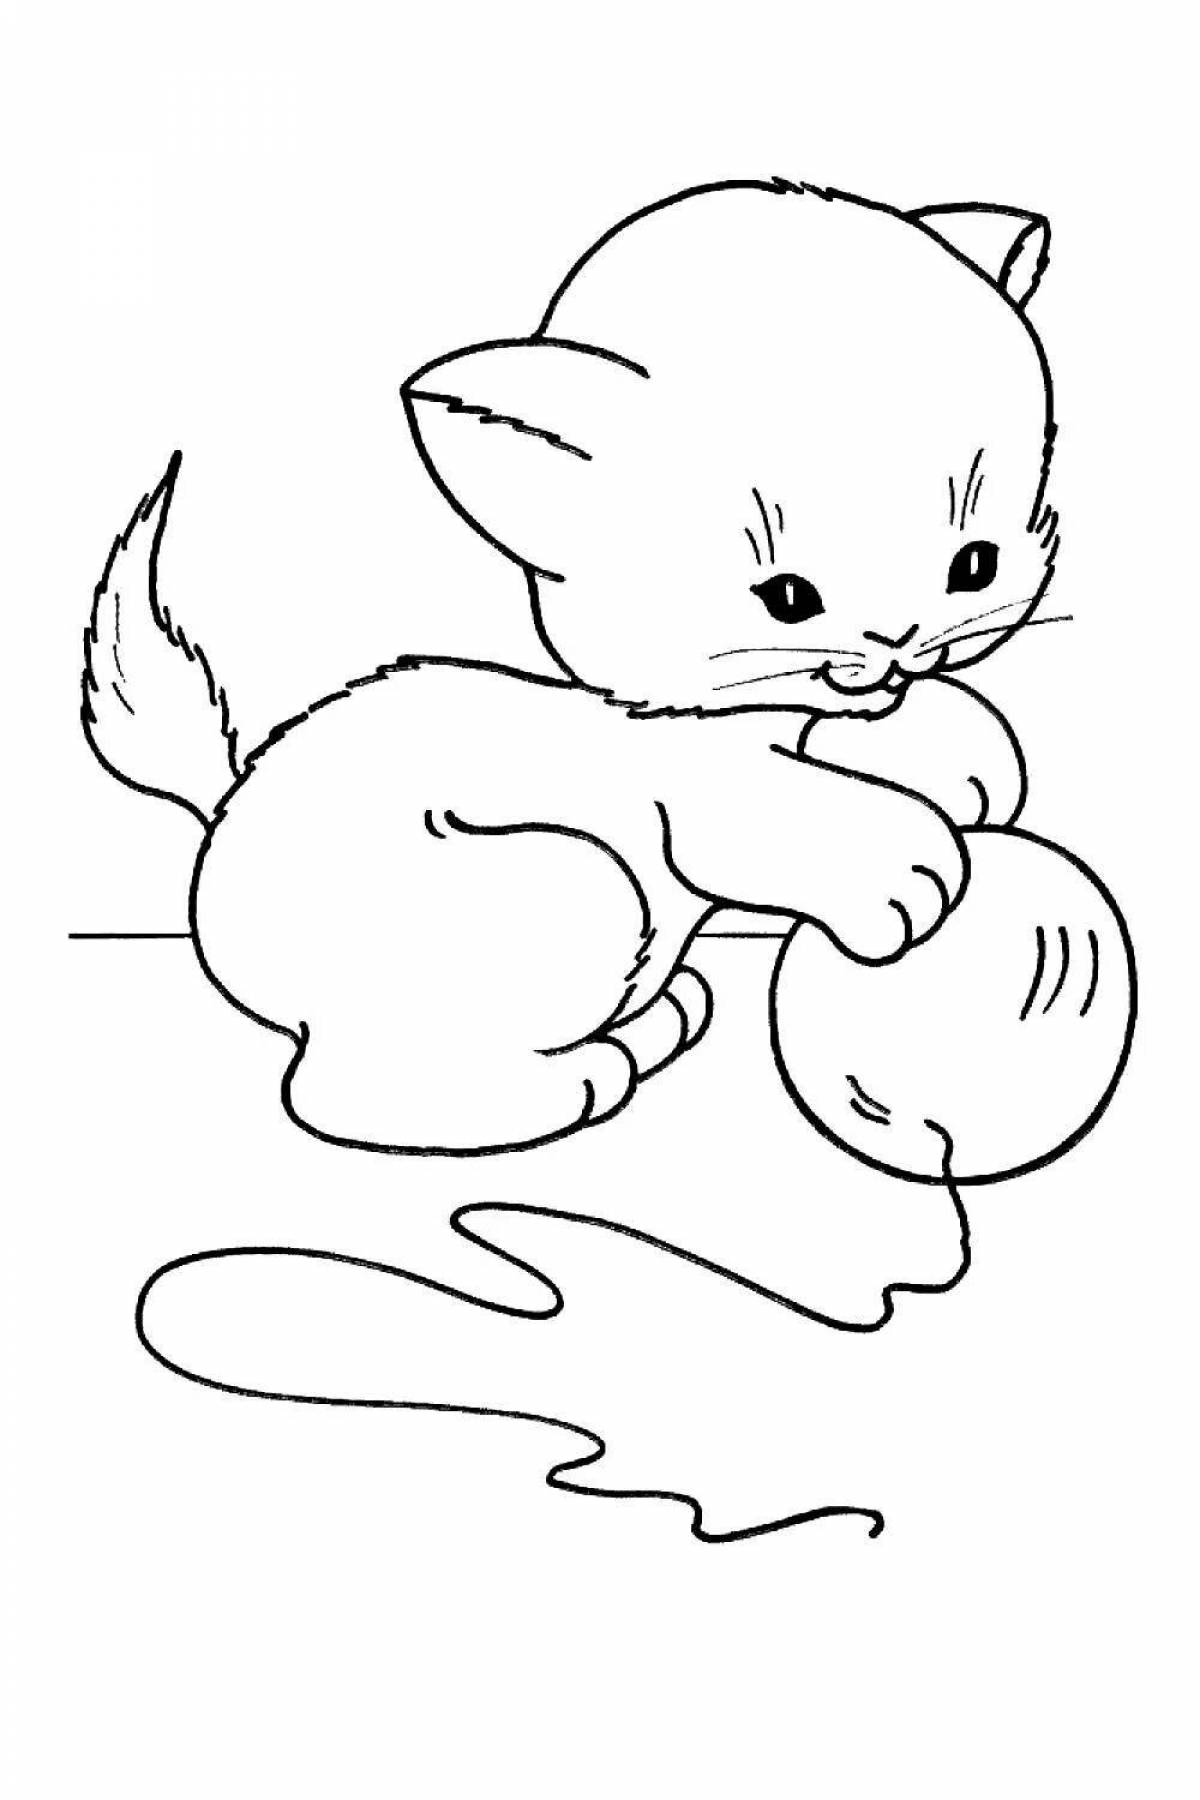 Curious kitten with ball coloring page